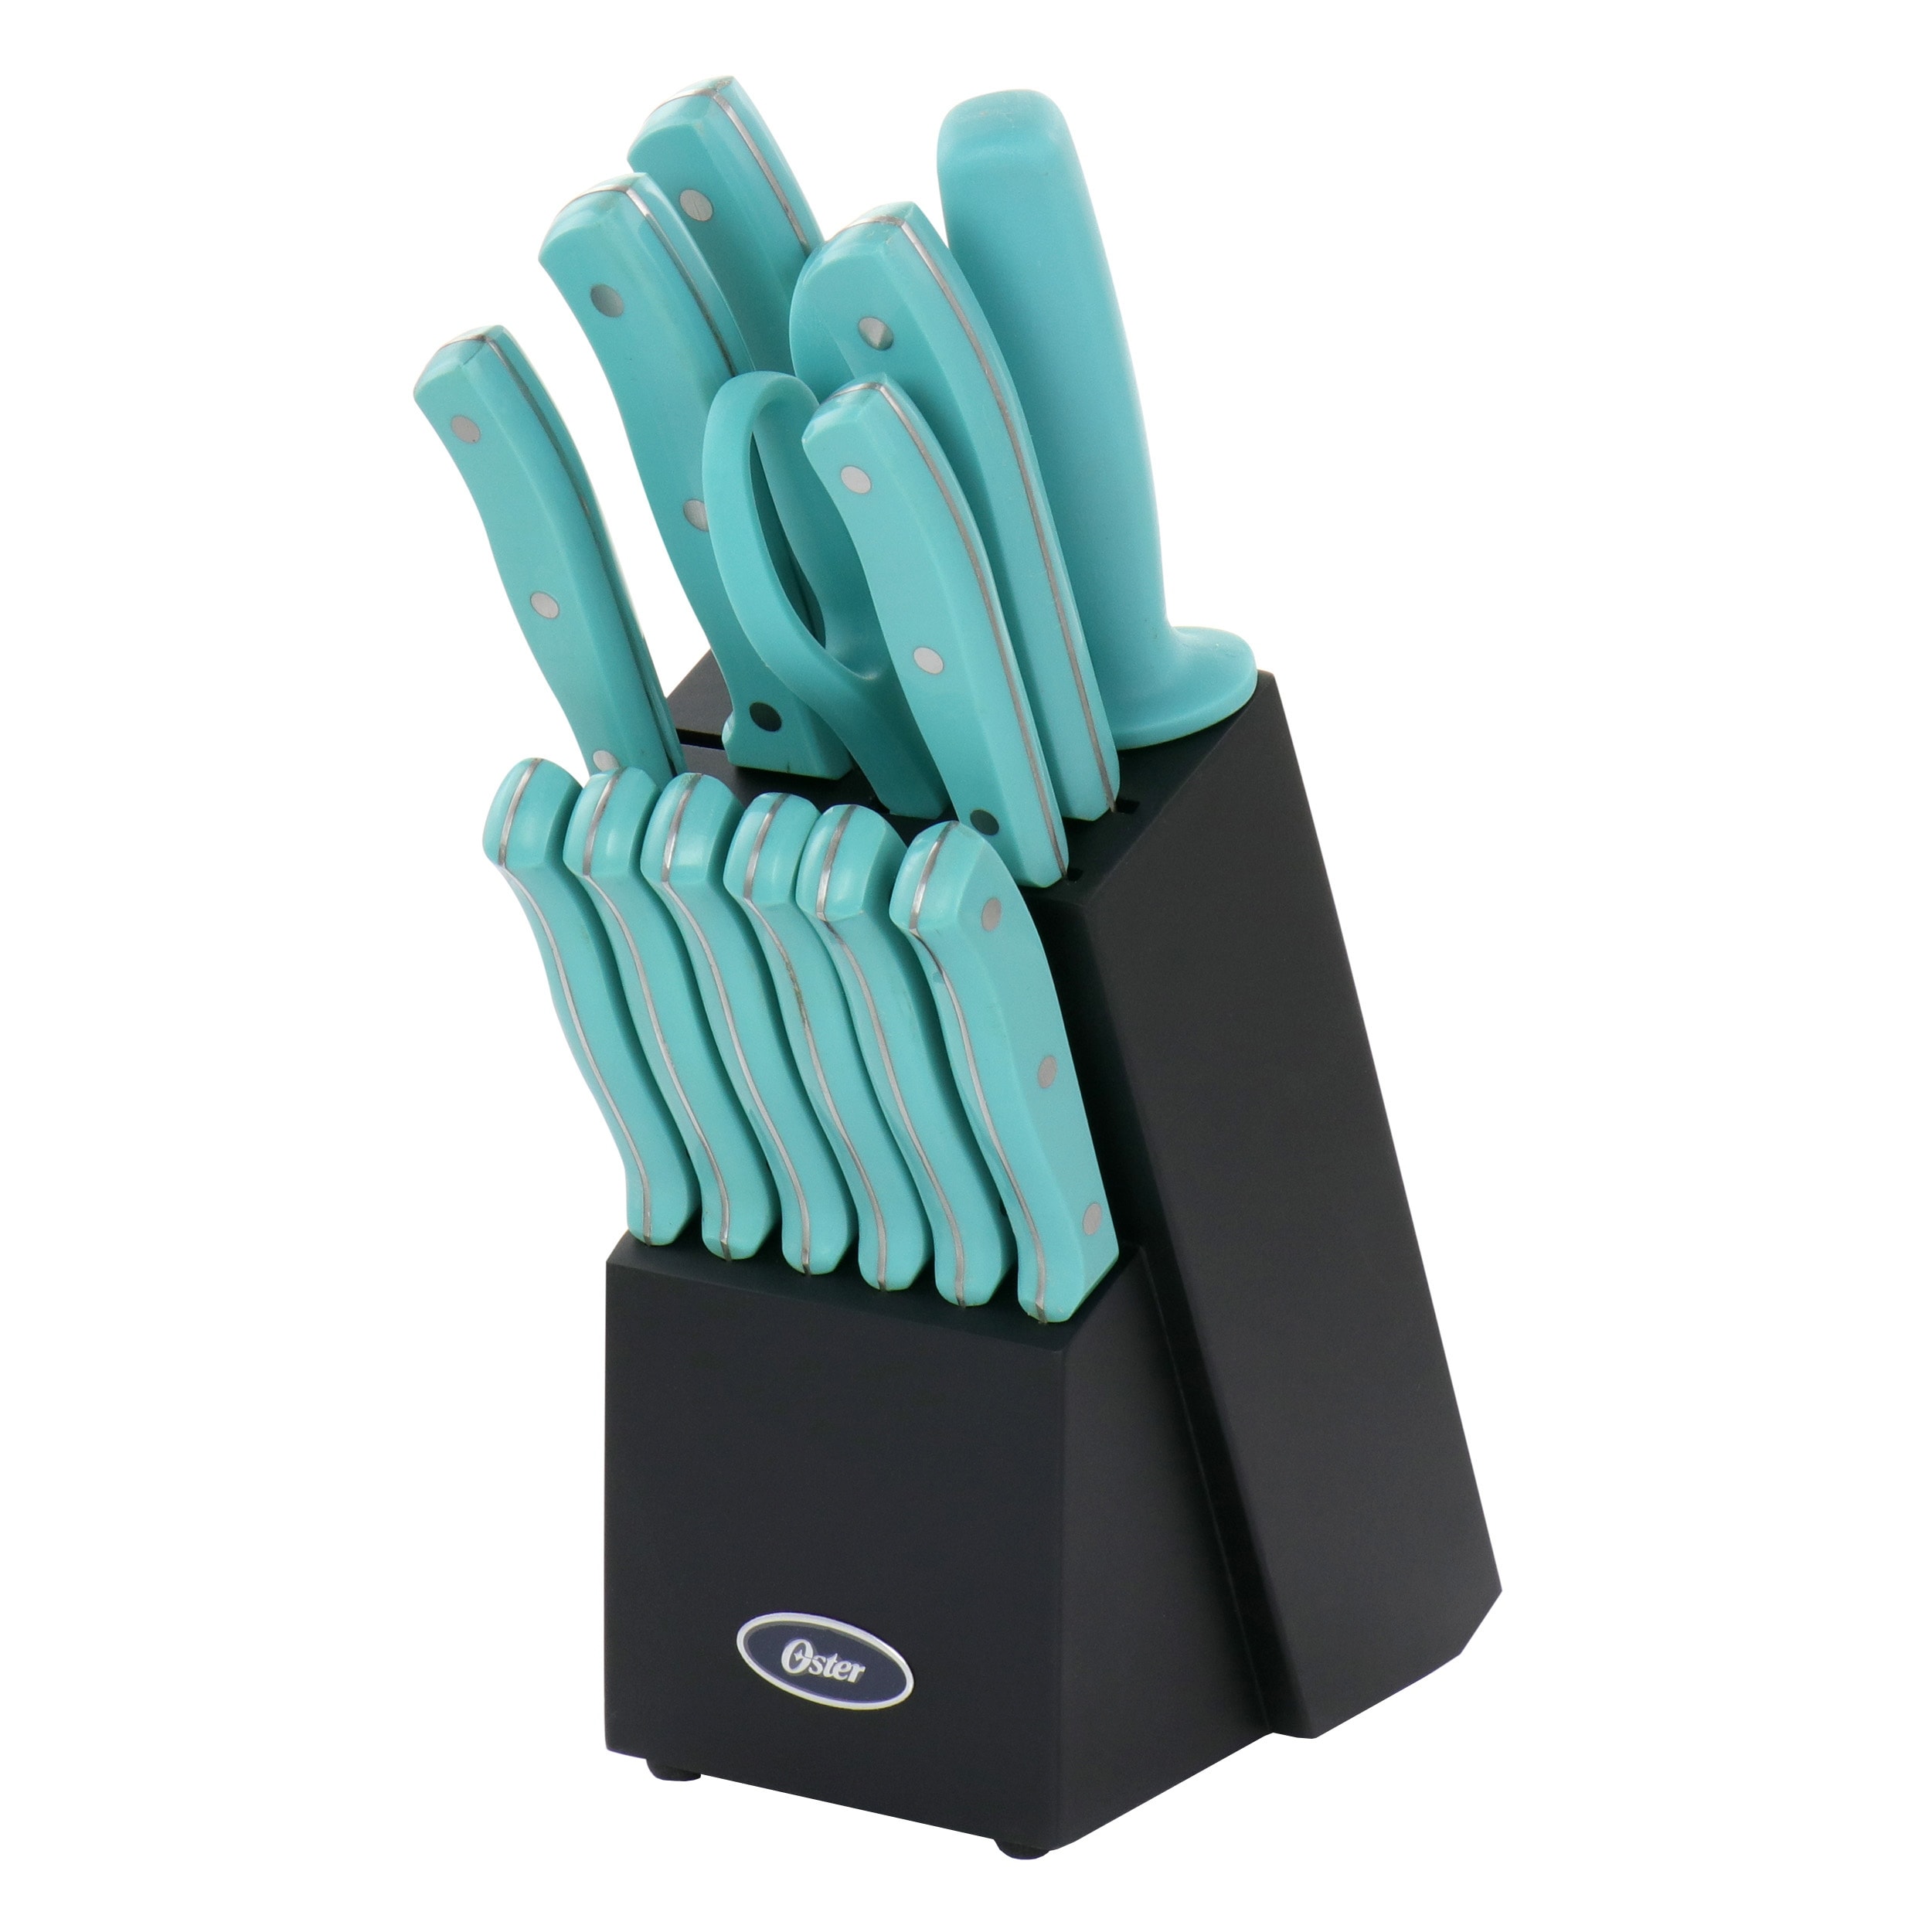 https://ak1.ostkcdn.com/images/products/is/images/direct/6b0251f3b15b0826d9aa72b368d2bbe71aa6630a/Stainless-Steel-Cutlery-14-Piece-Set-in-Teal.jpg